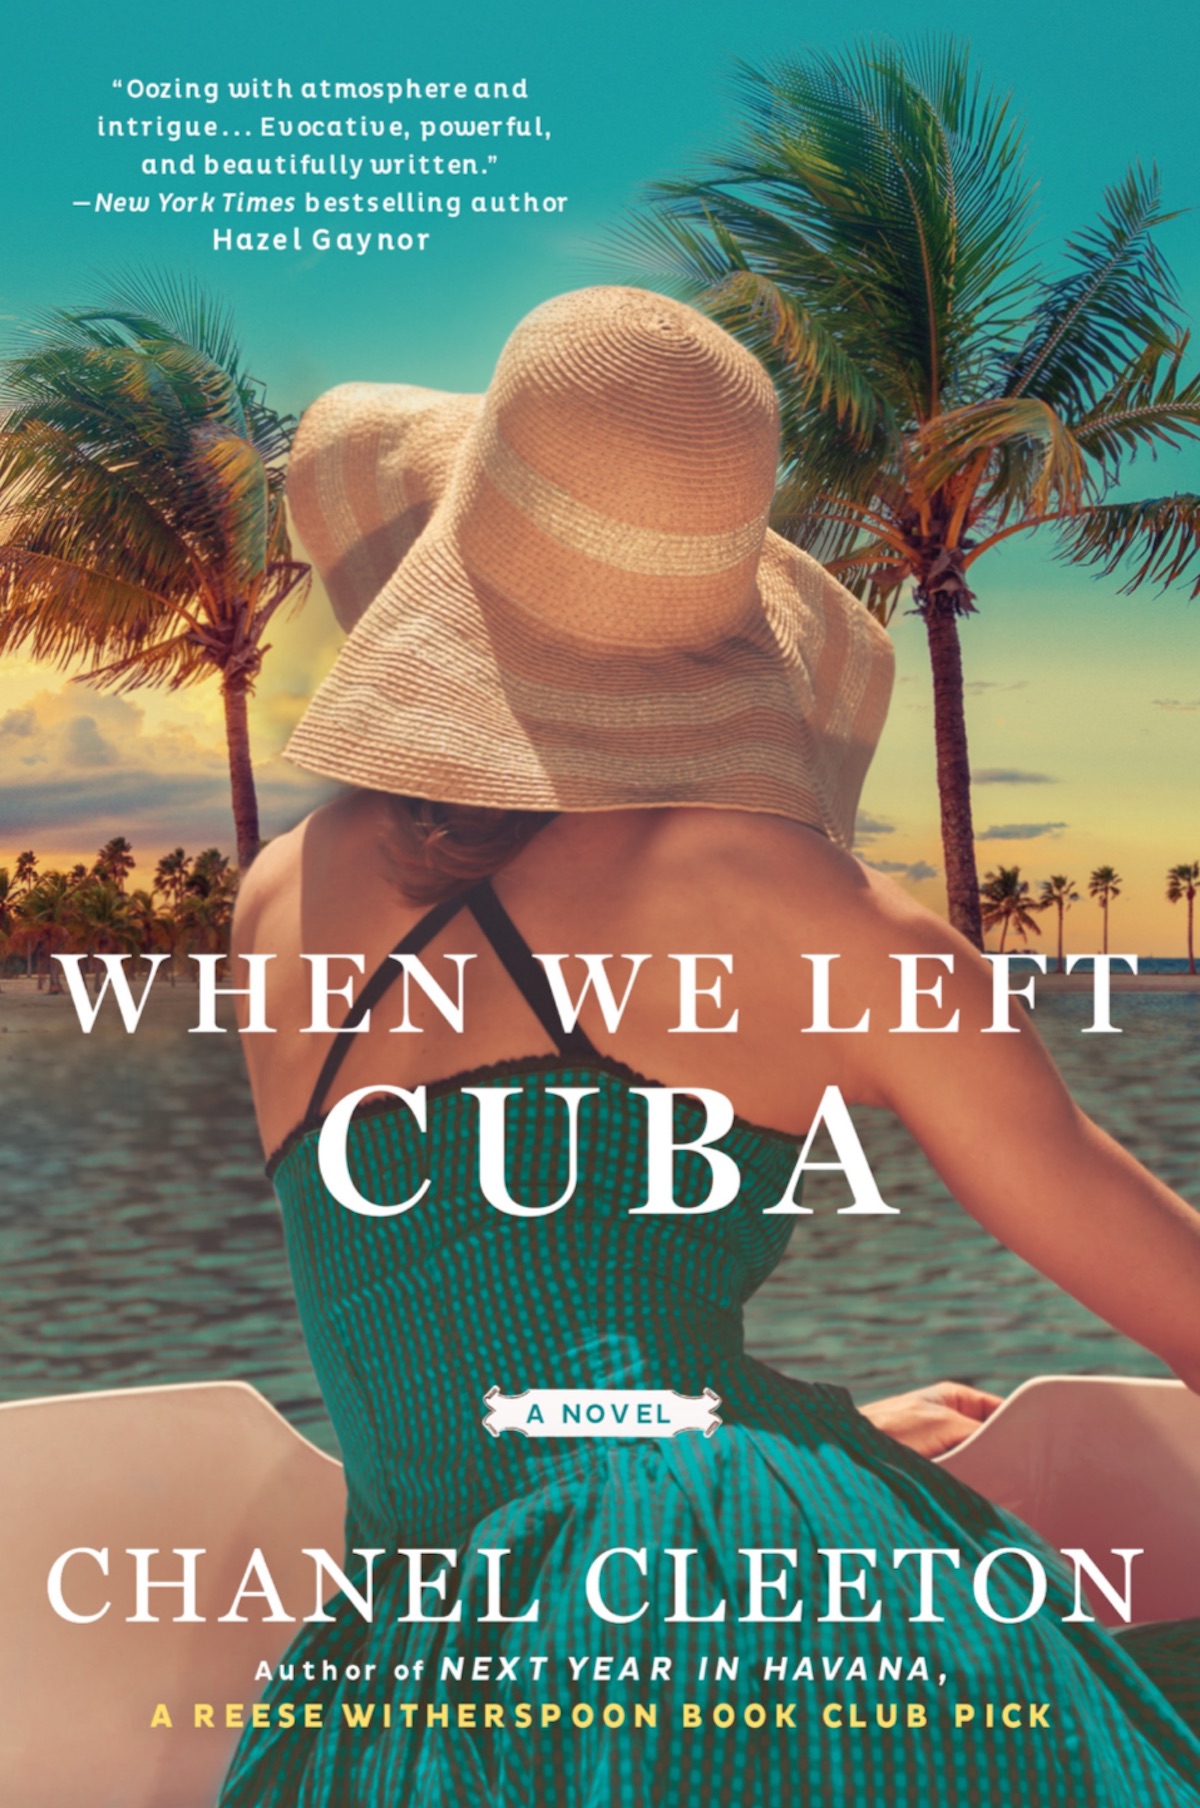 The Ending of When We Left Cuba by Chanel Cleeton